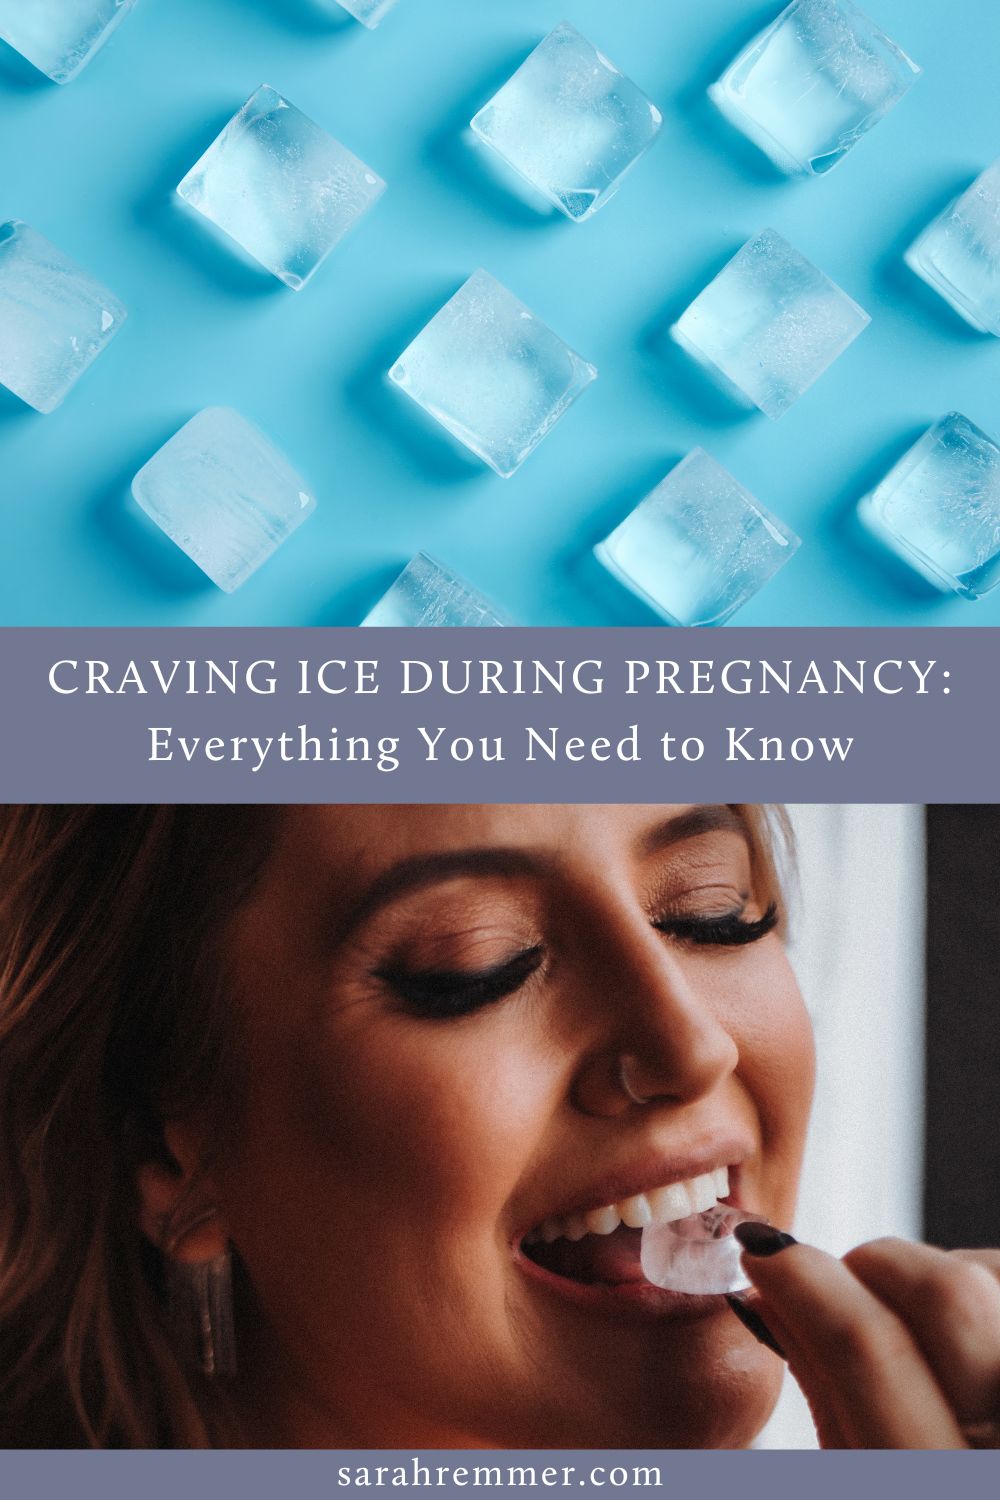 Are you craving ice during pregnancy? You are not alone as this can be triggered for a few different reasons.